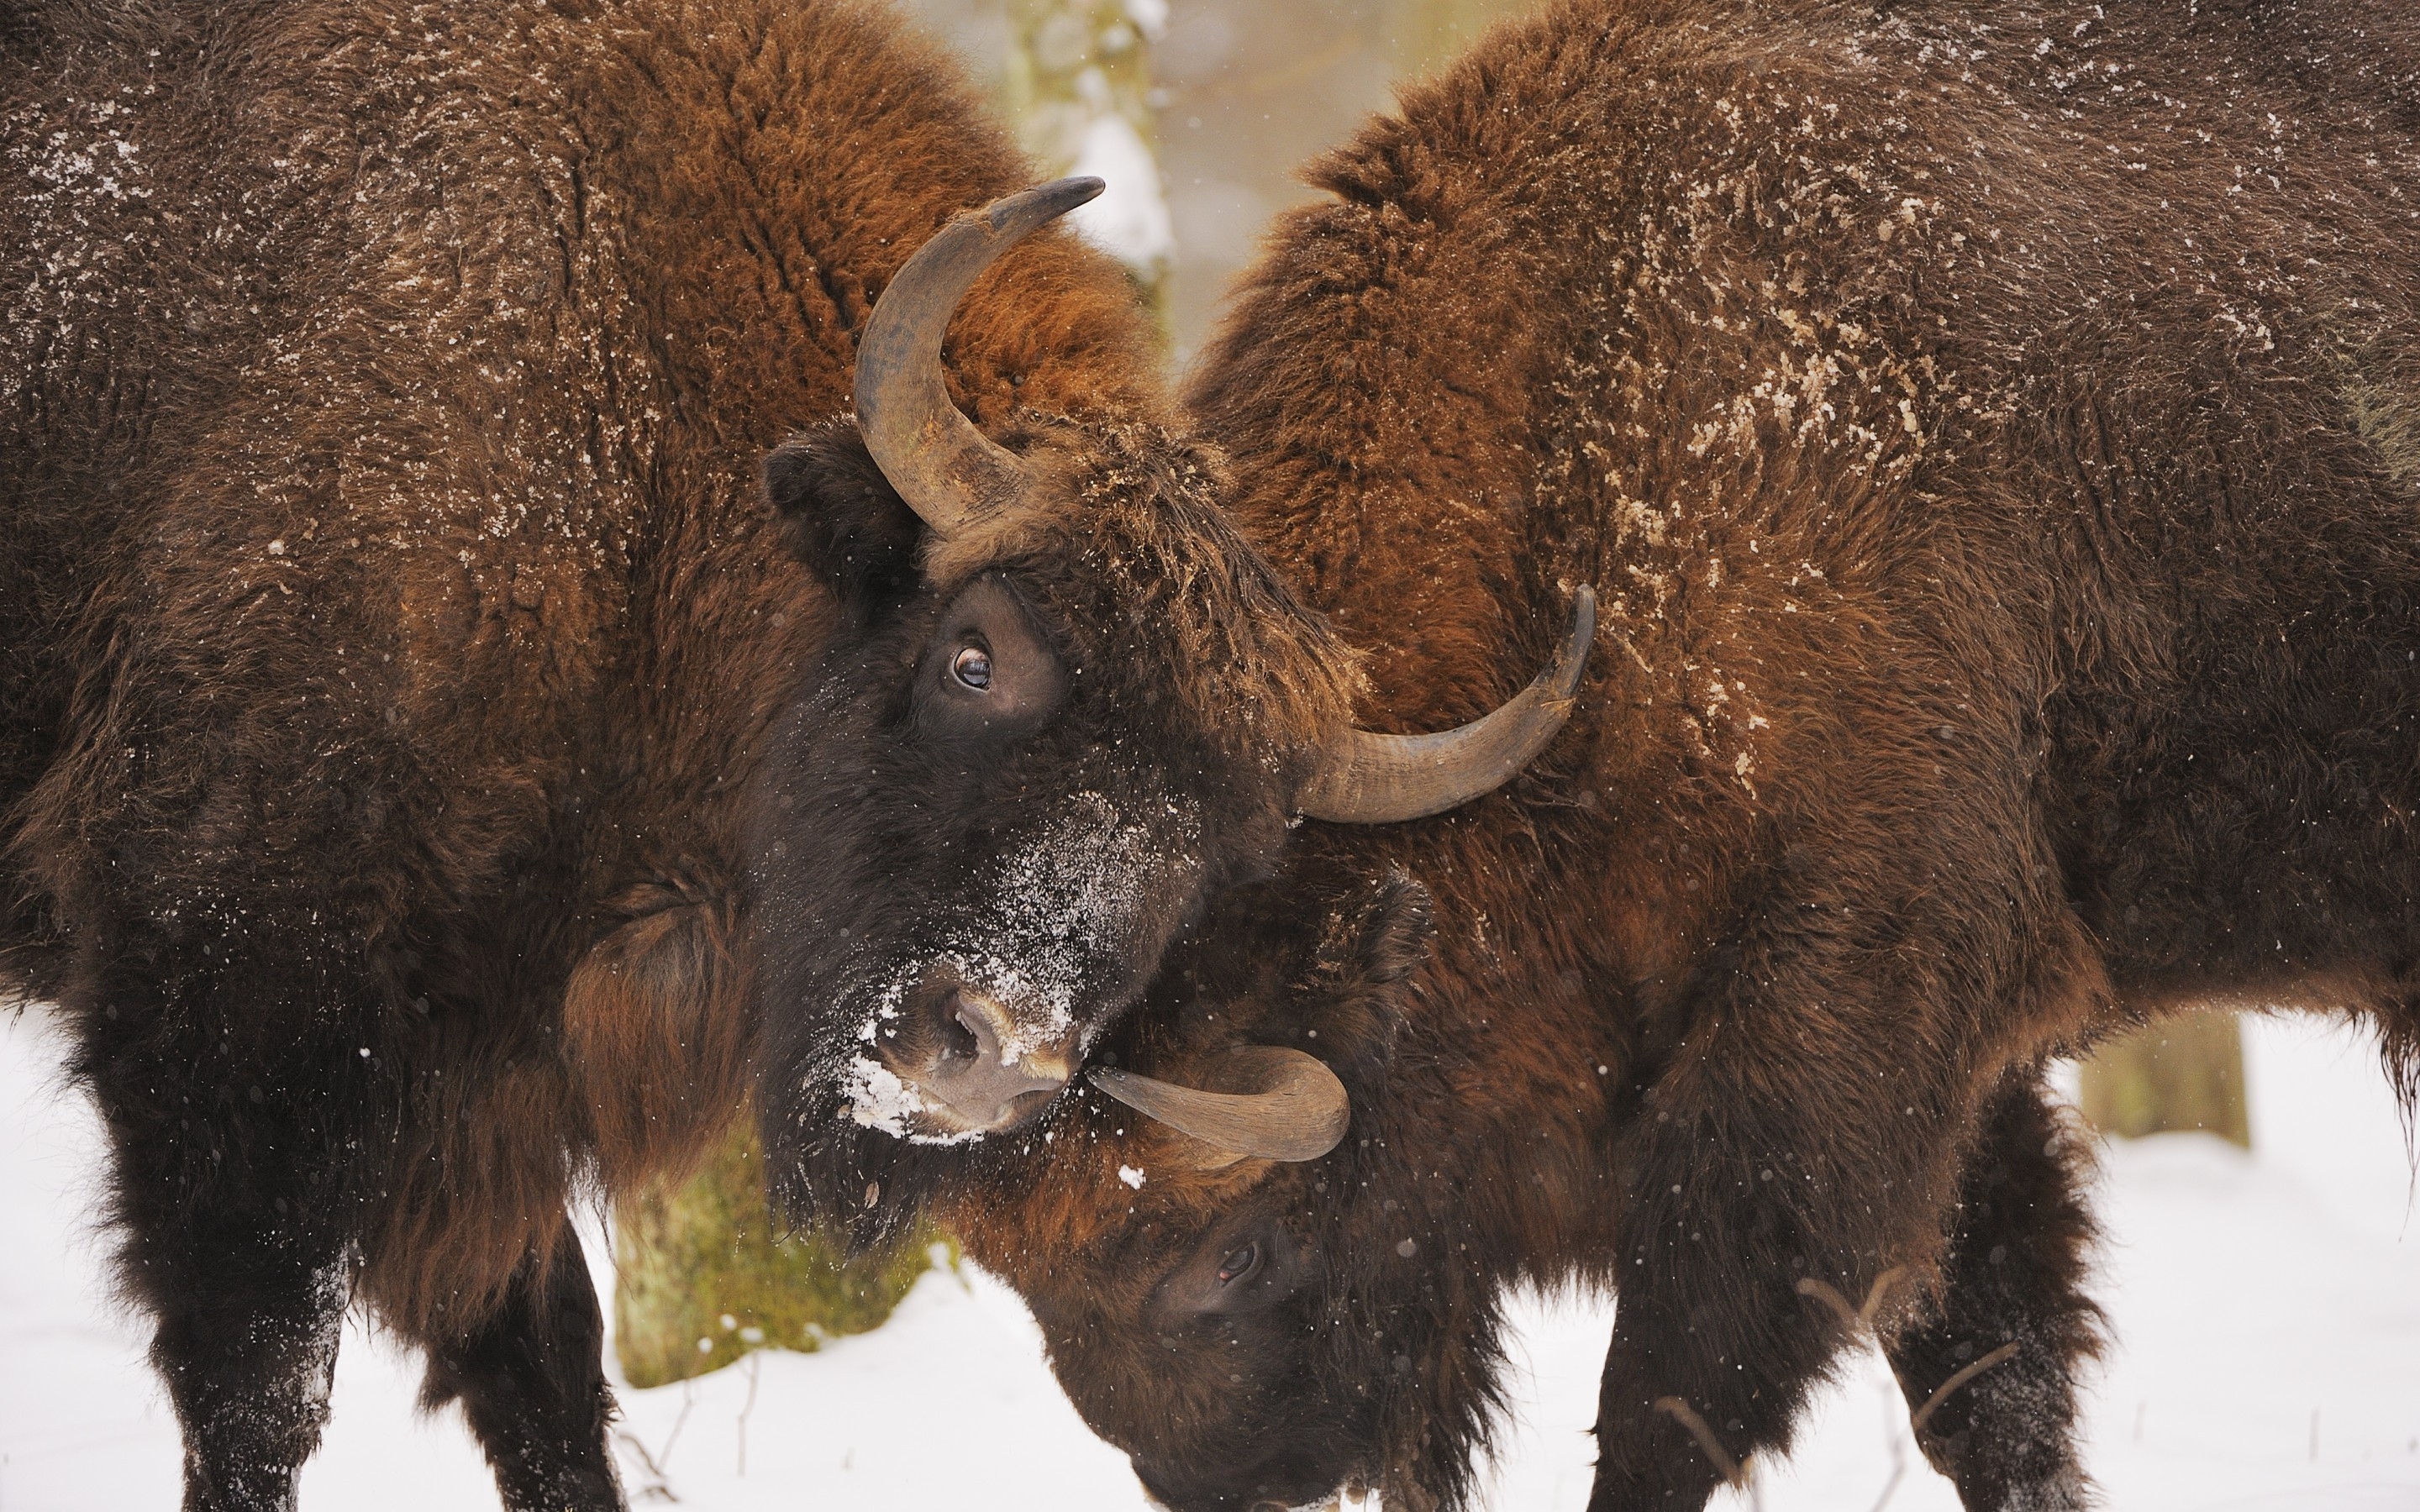 Bison Fight for 2880 x 1800 Retina Display resolution